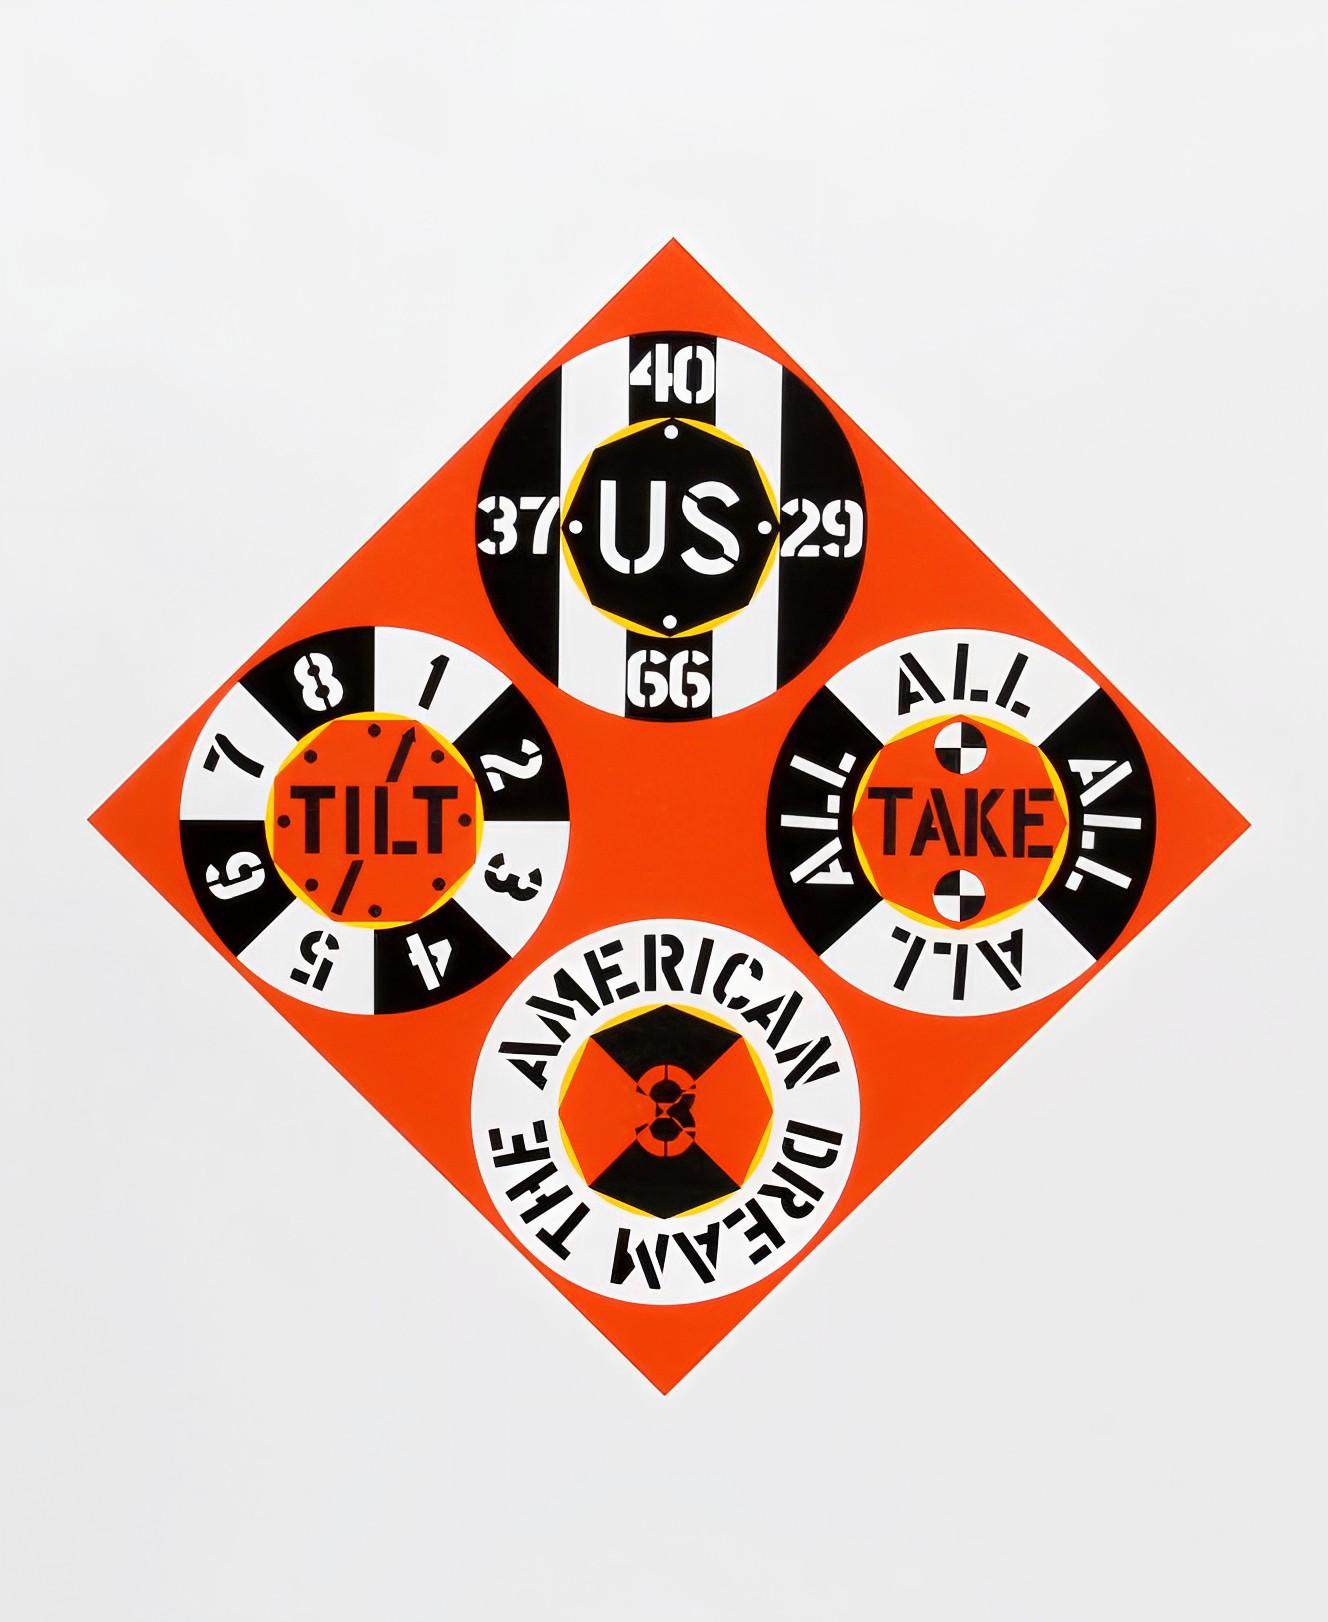 What did Robert Indiana do?